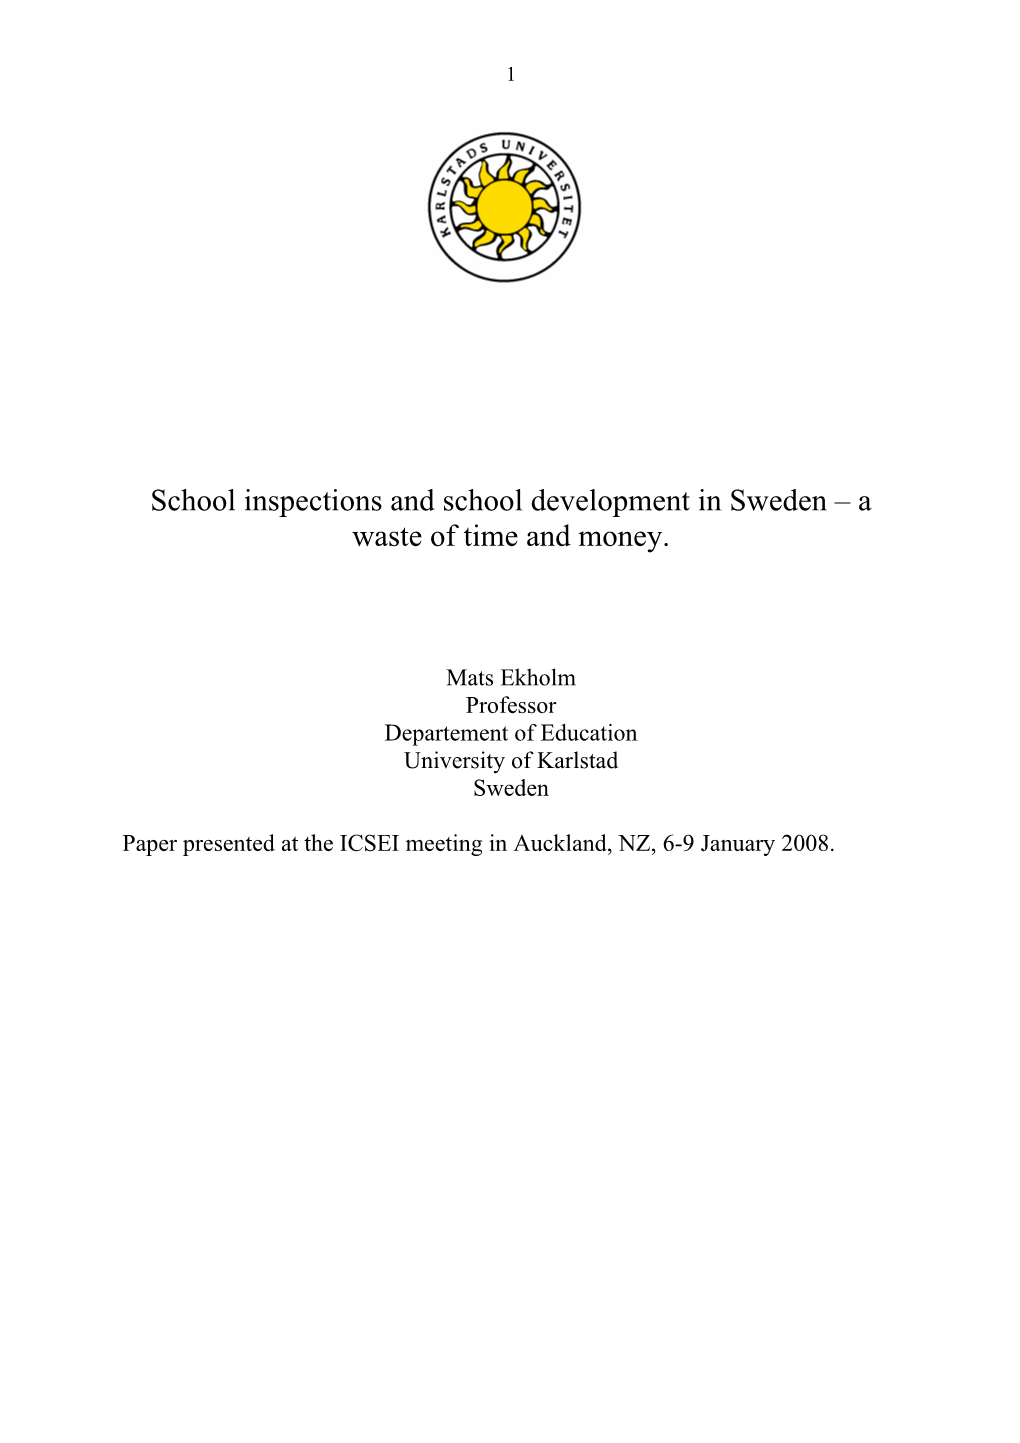 School Inspections and School Development in Sweden a Waste of Time and Money